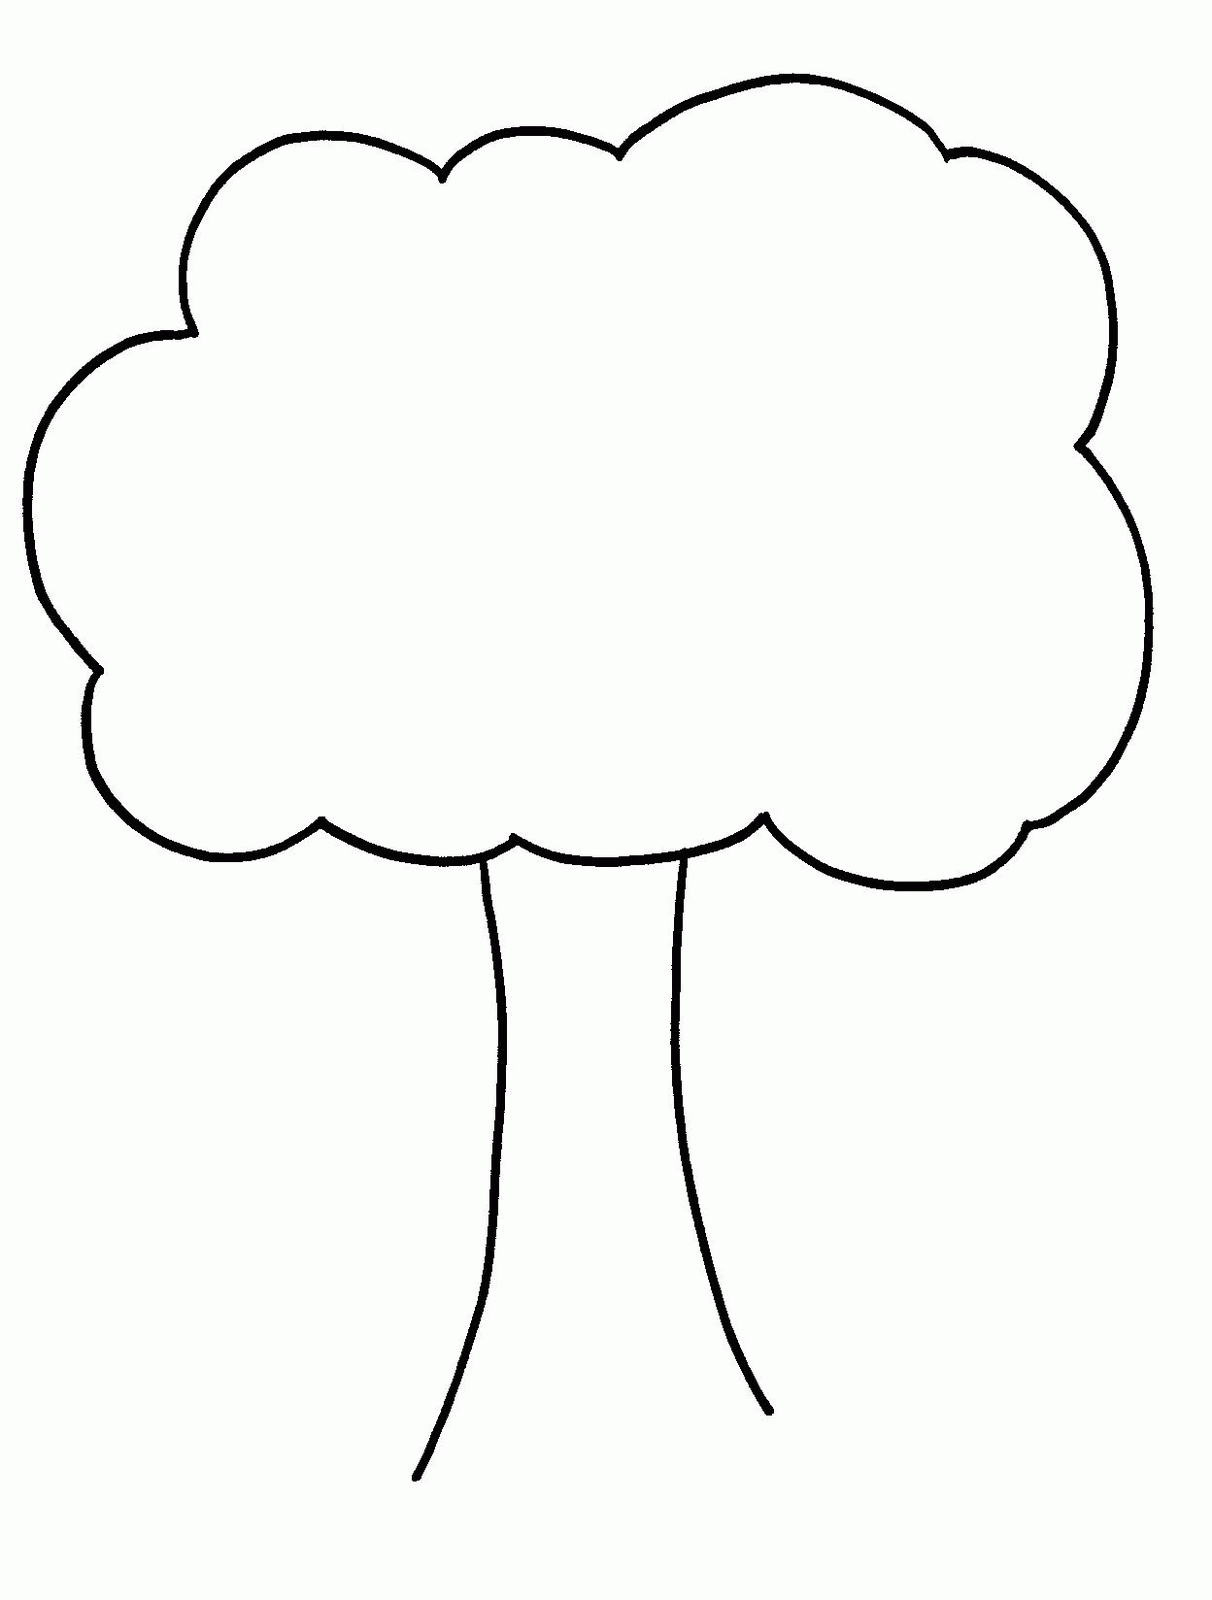 Outline Of Tree - Coloring Pages for Kids and for Adults